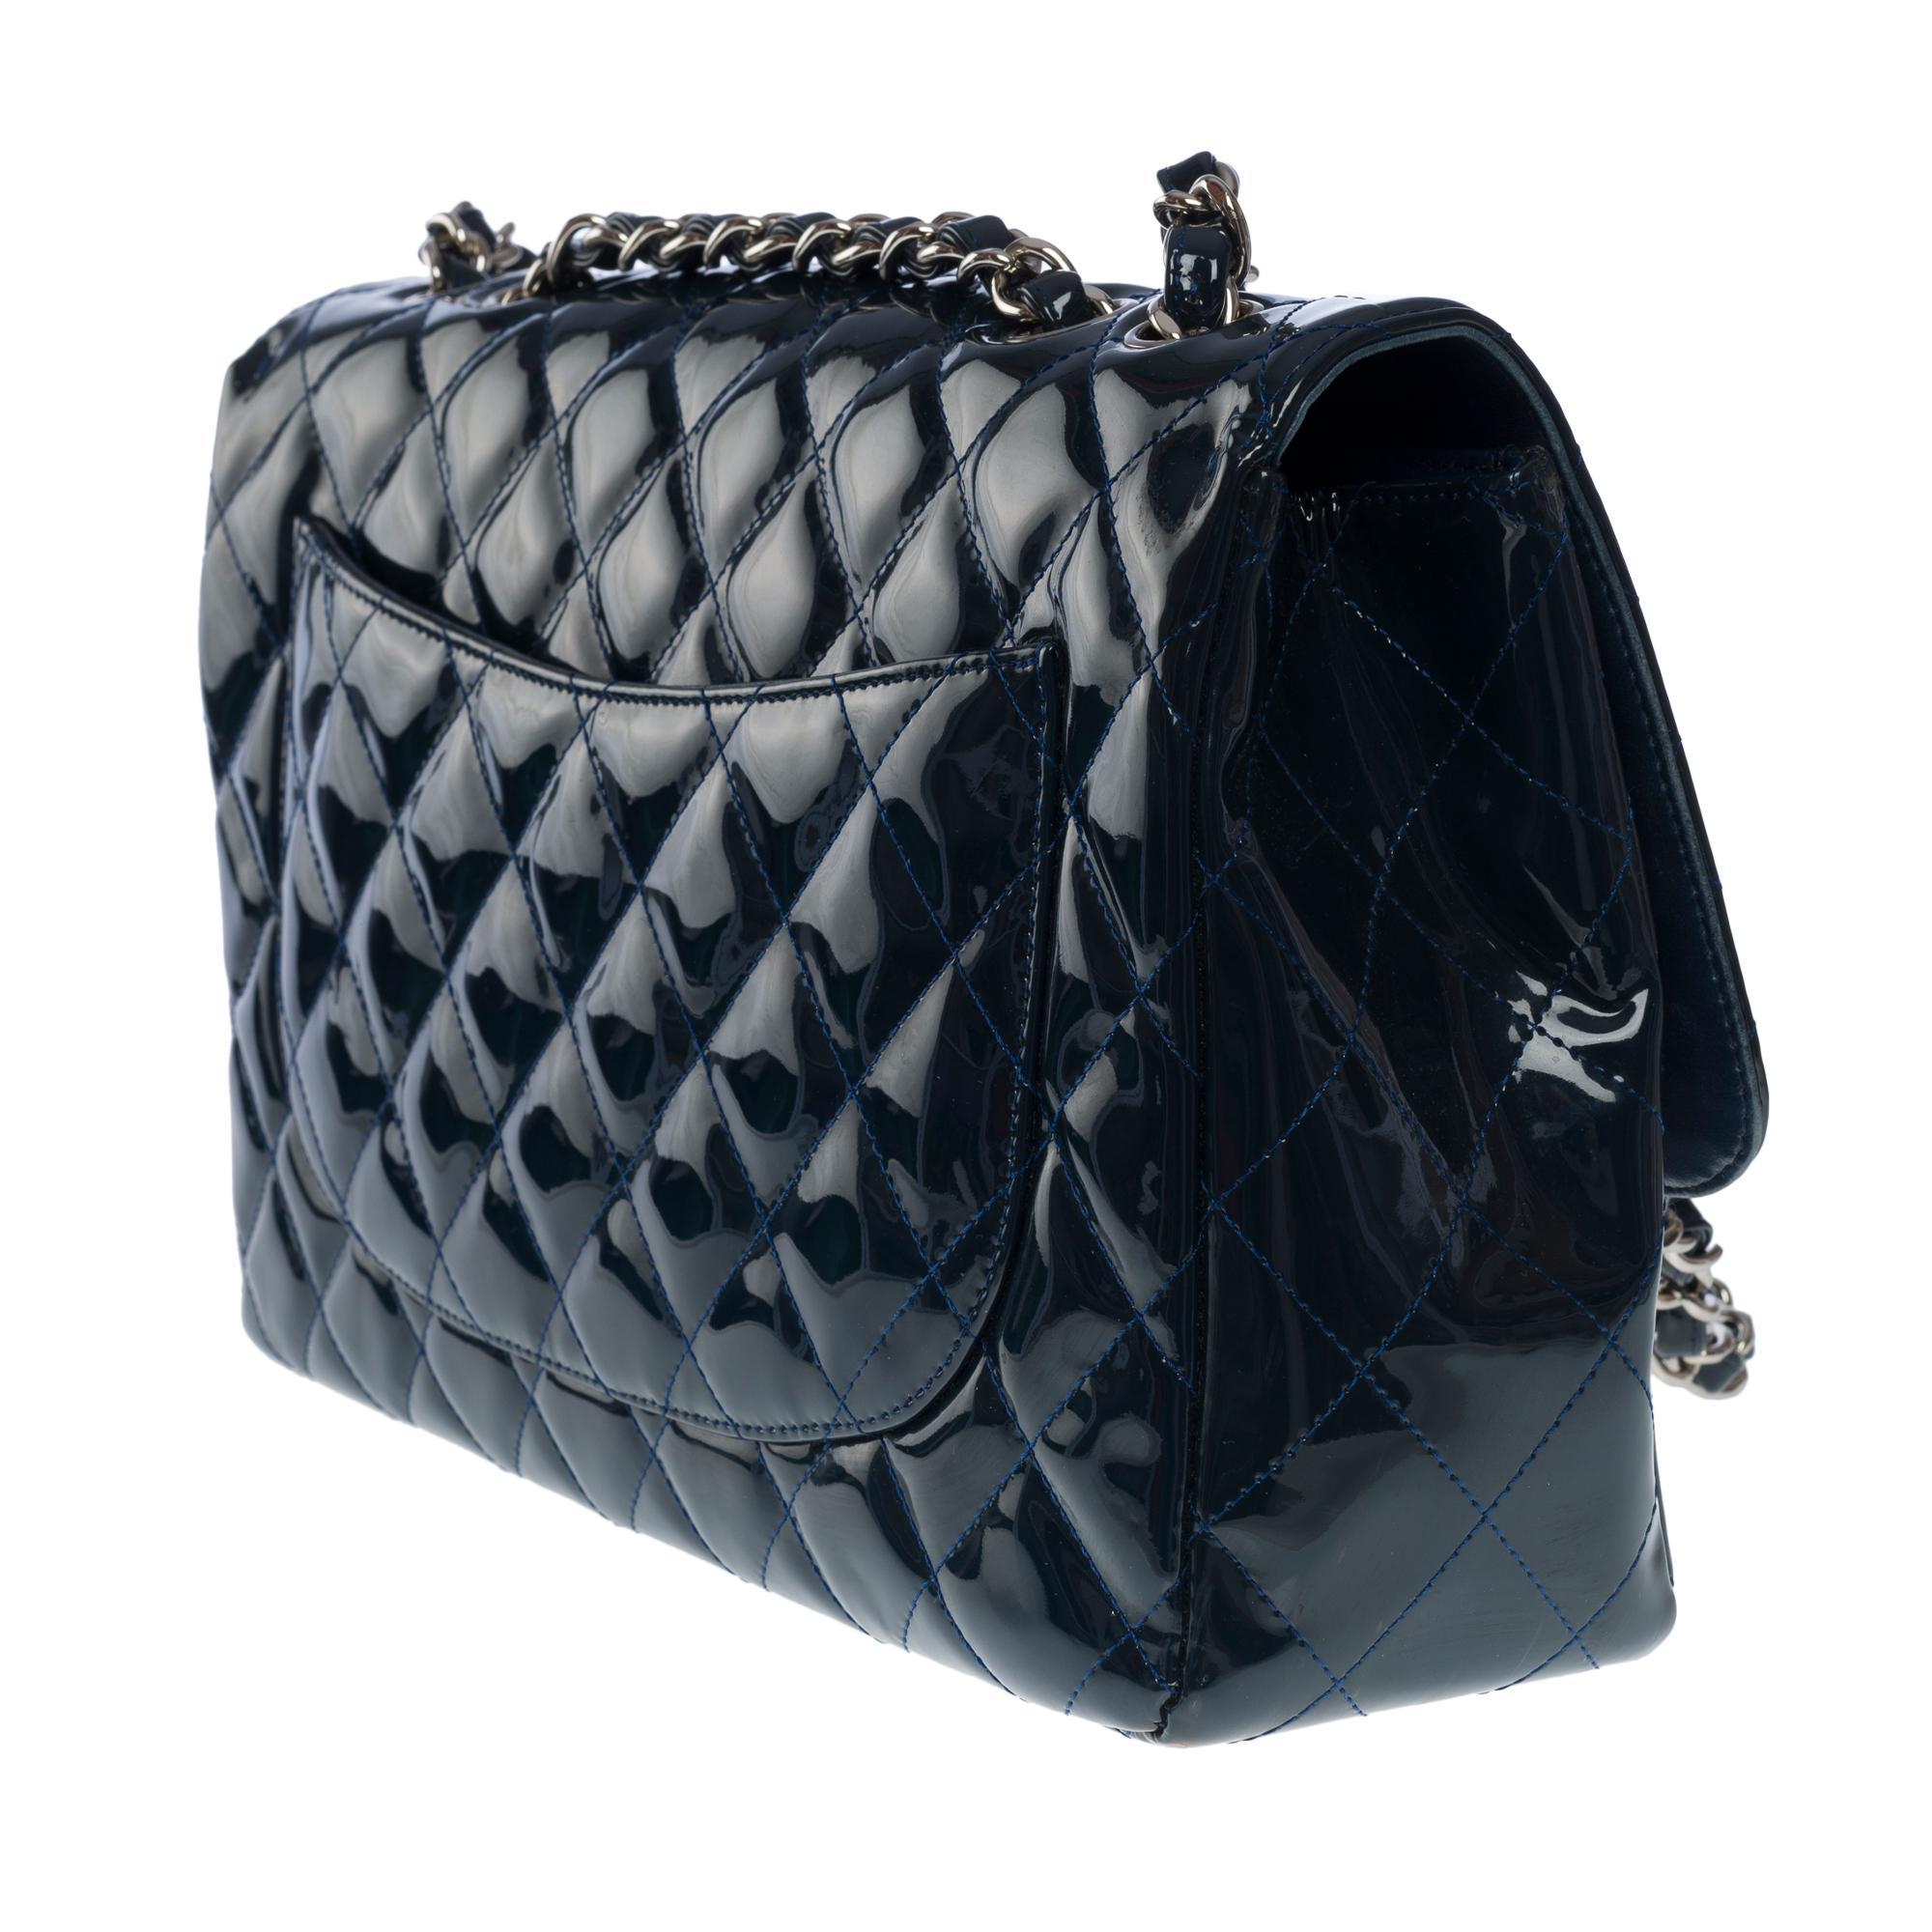 Lovely Chanel Timeless Jumbo shoulder flap bag in Navy blue patent leather, SHW 1